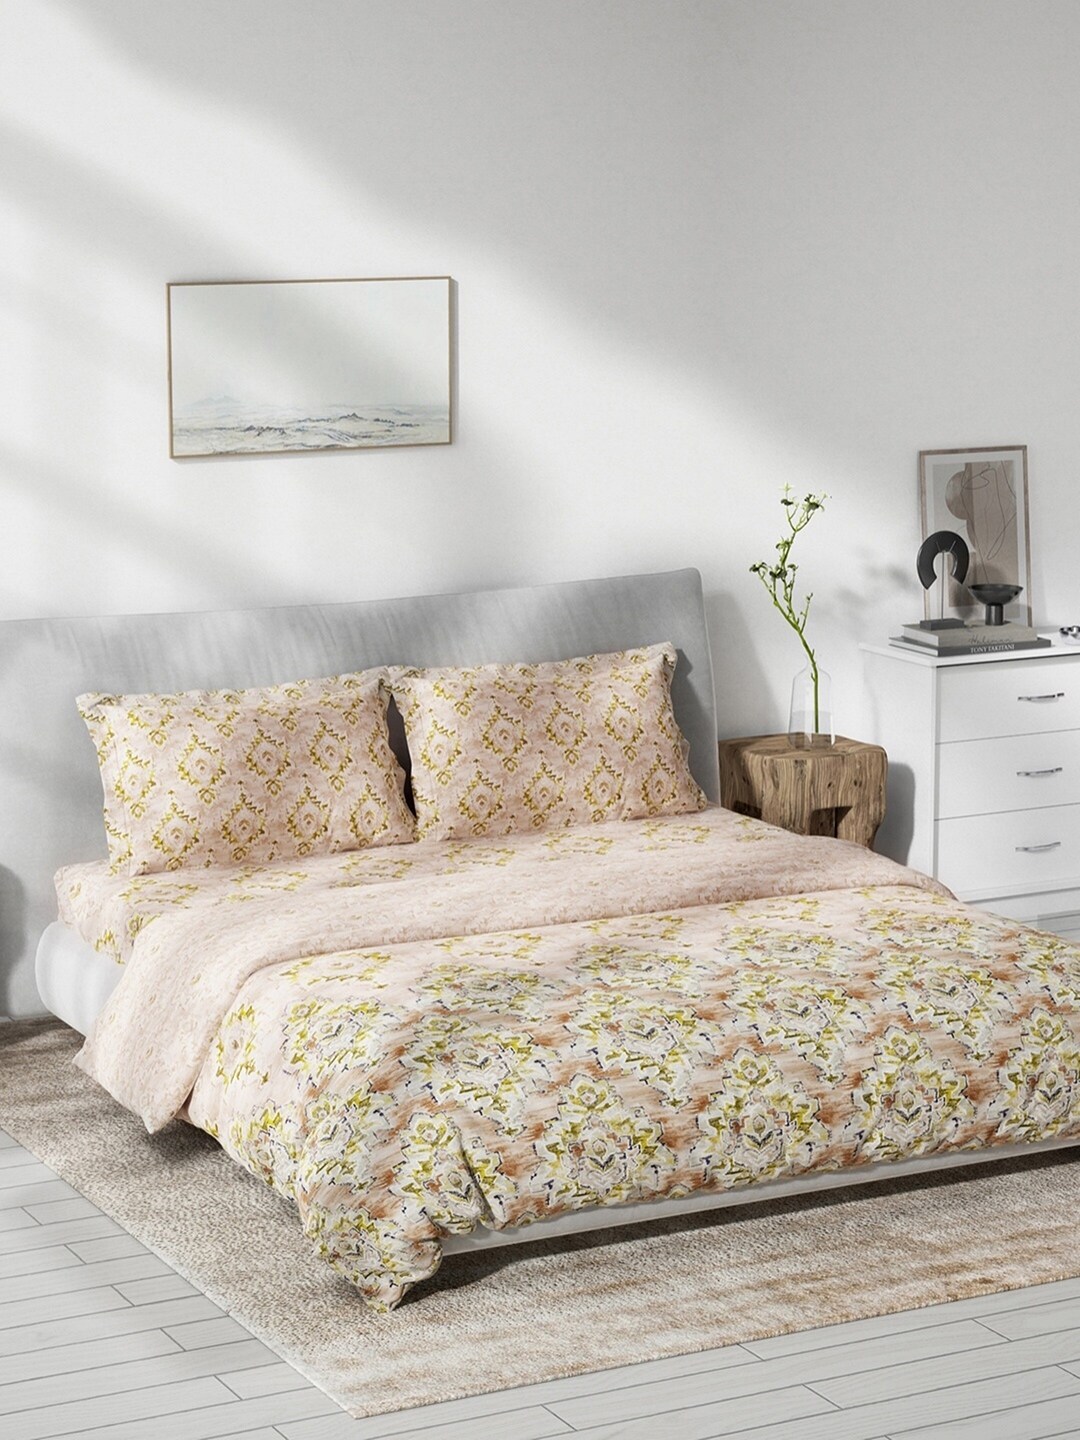 DDecor Peach-Coloured & Beige Ethnic Motif Printed Double Queen Bedding Set Price in India